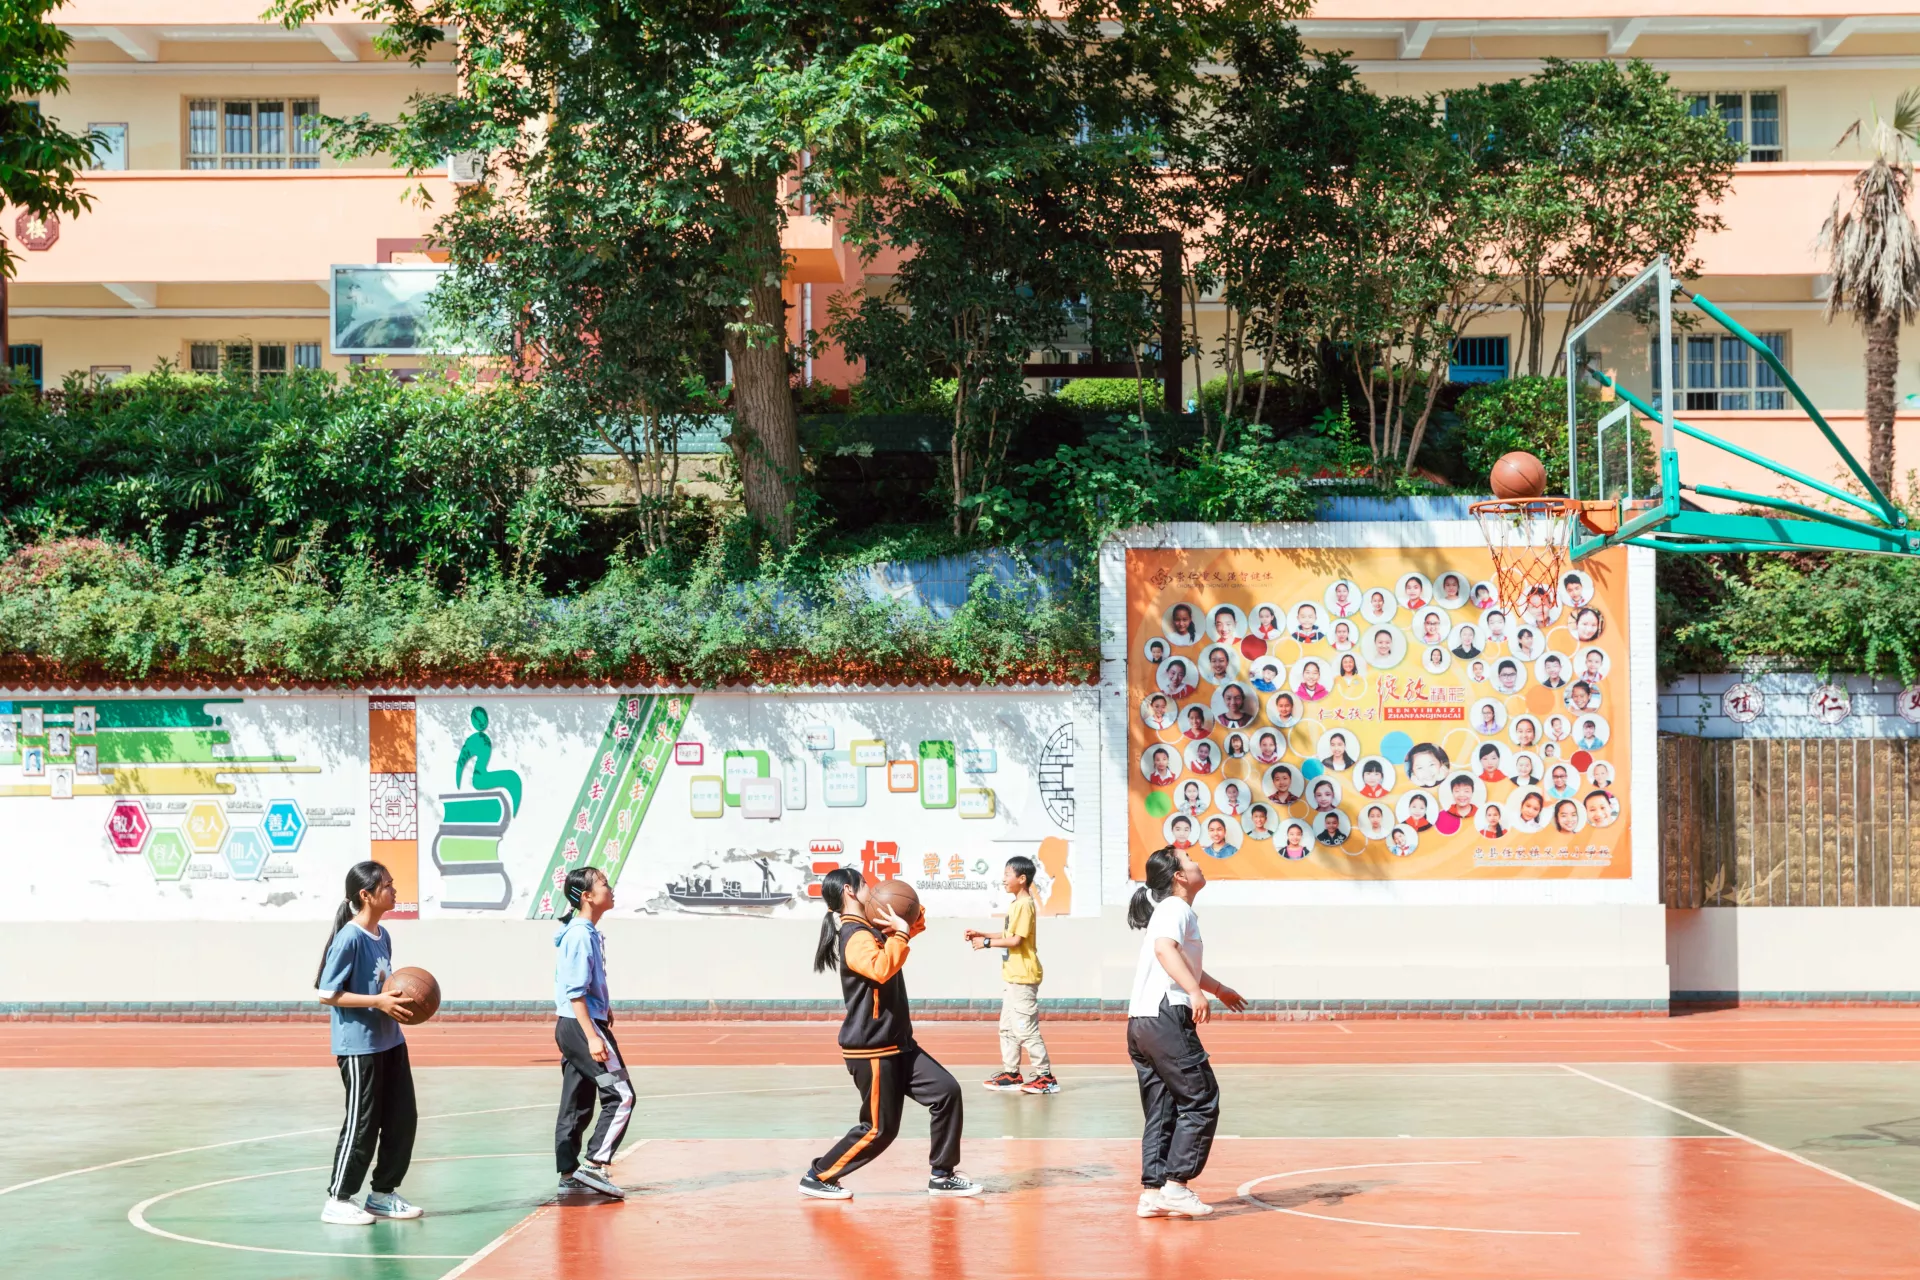 Students attend PE lesson at Yixing School of Zhong County in Chongqing, China on 3 June 2020.